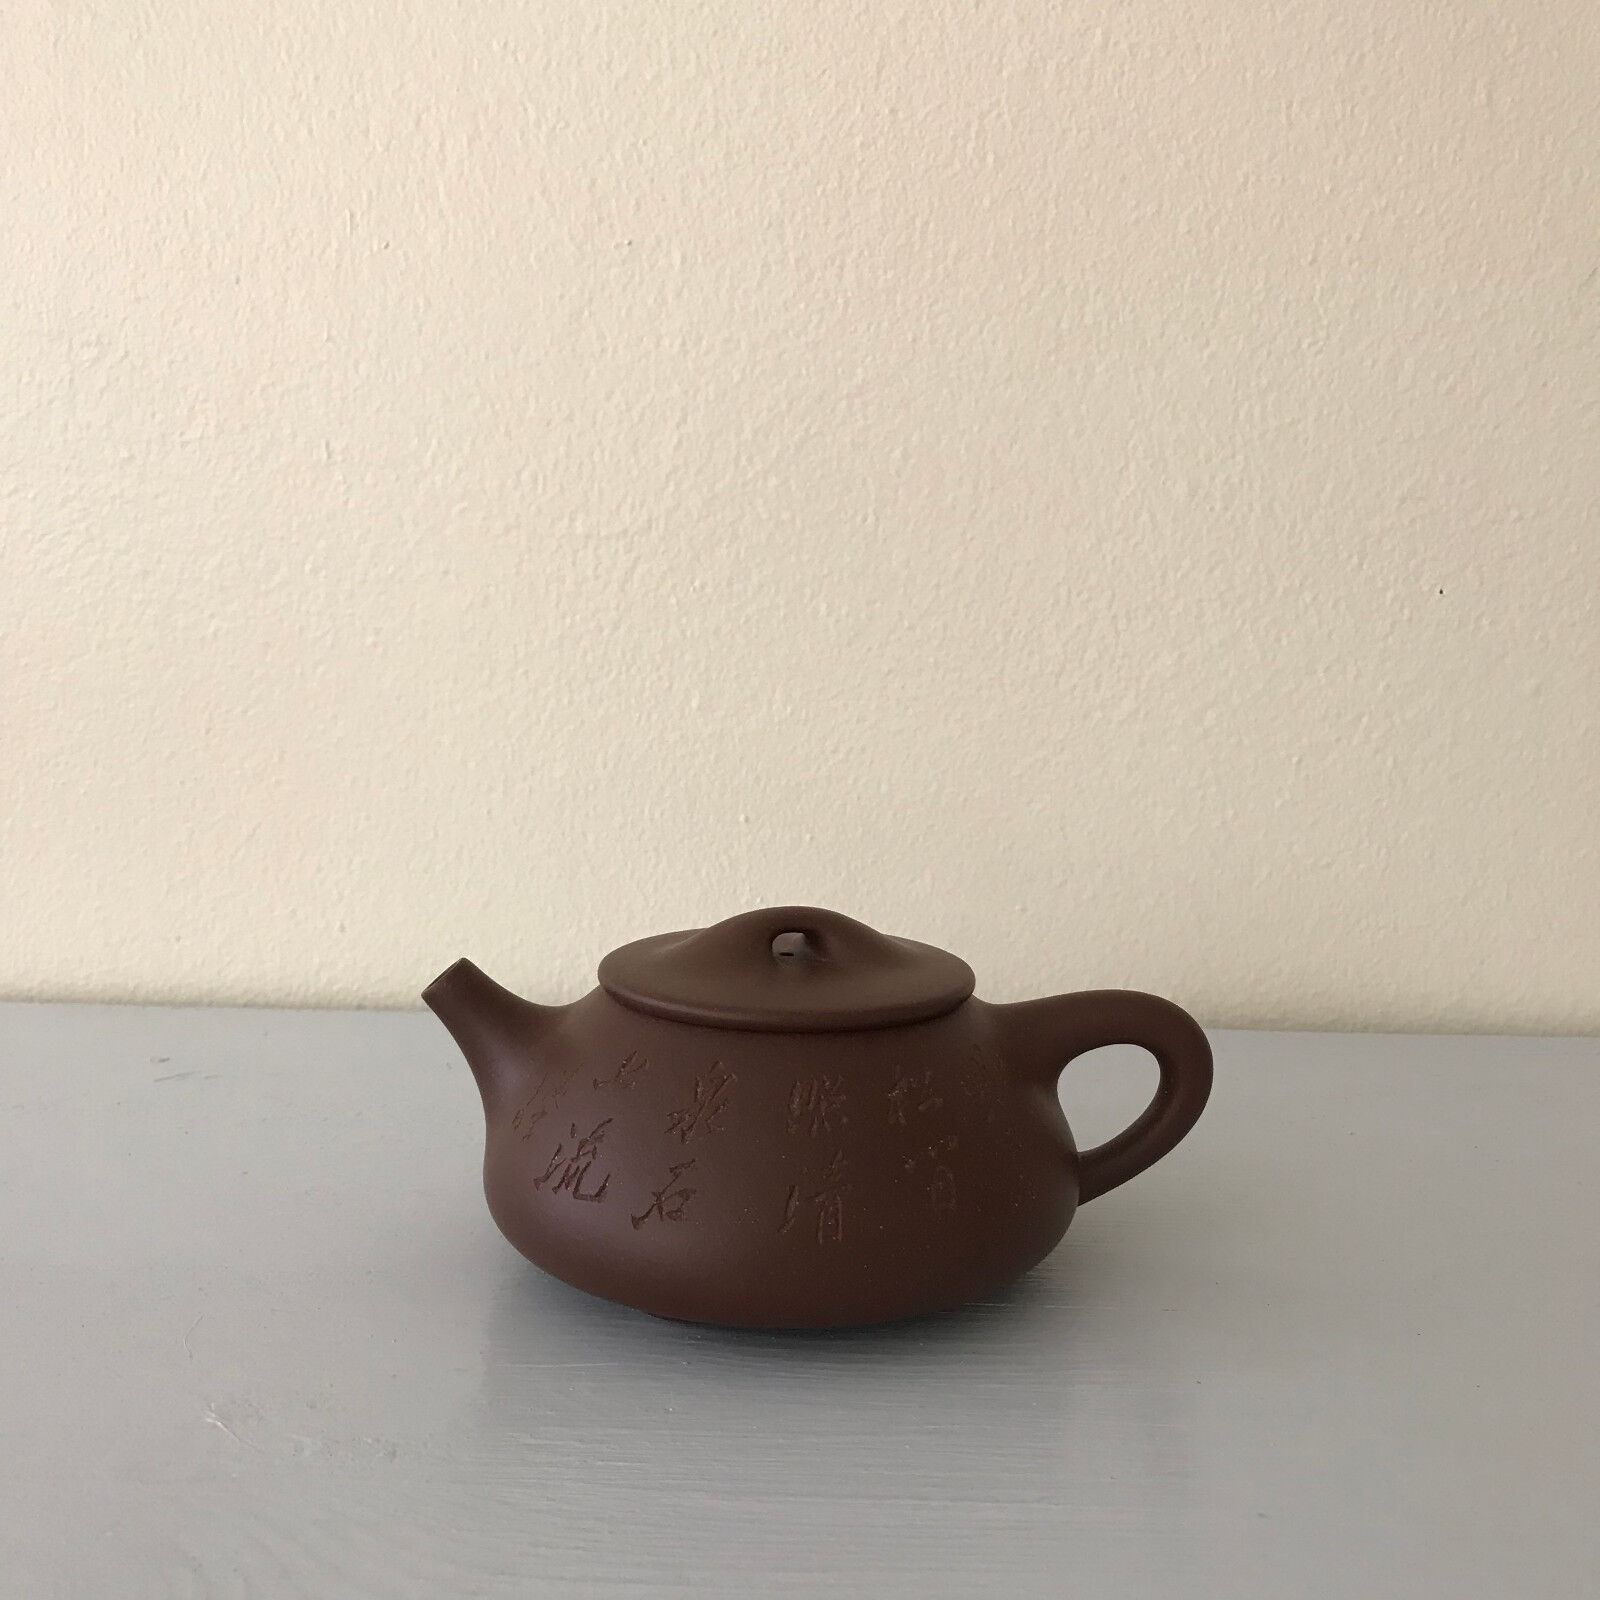 Yixiang purple clay teapot made by purple master